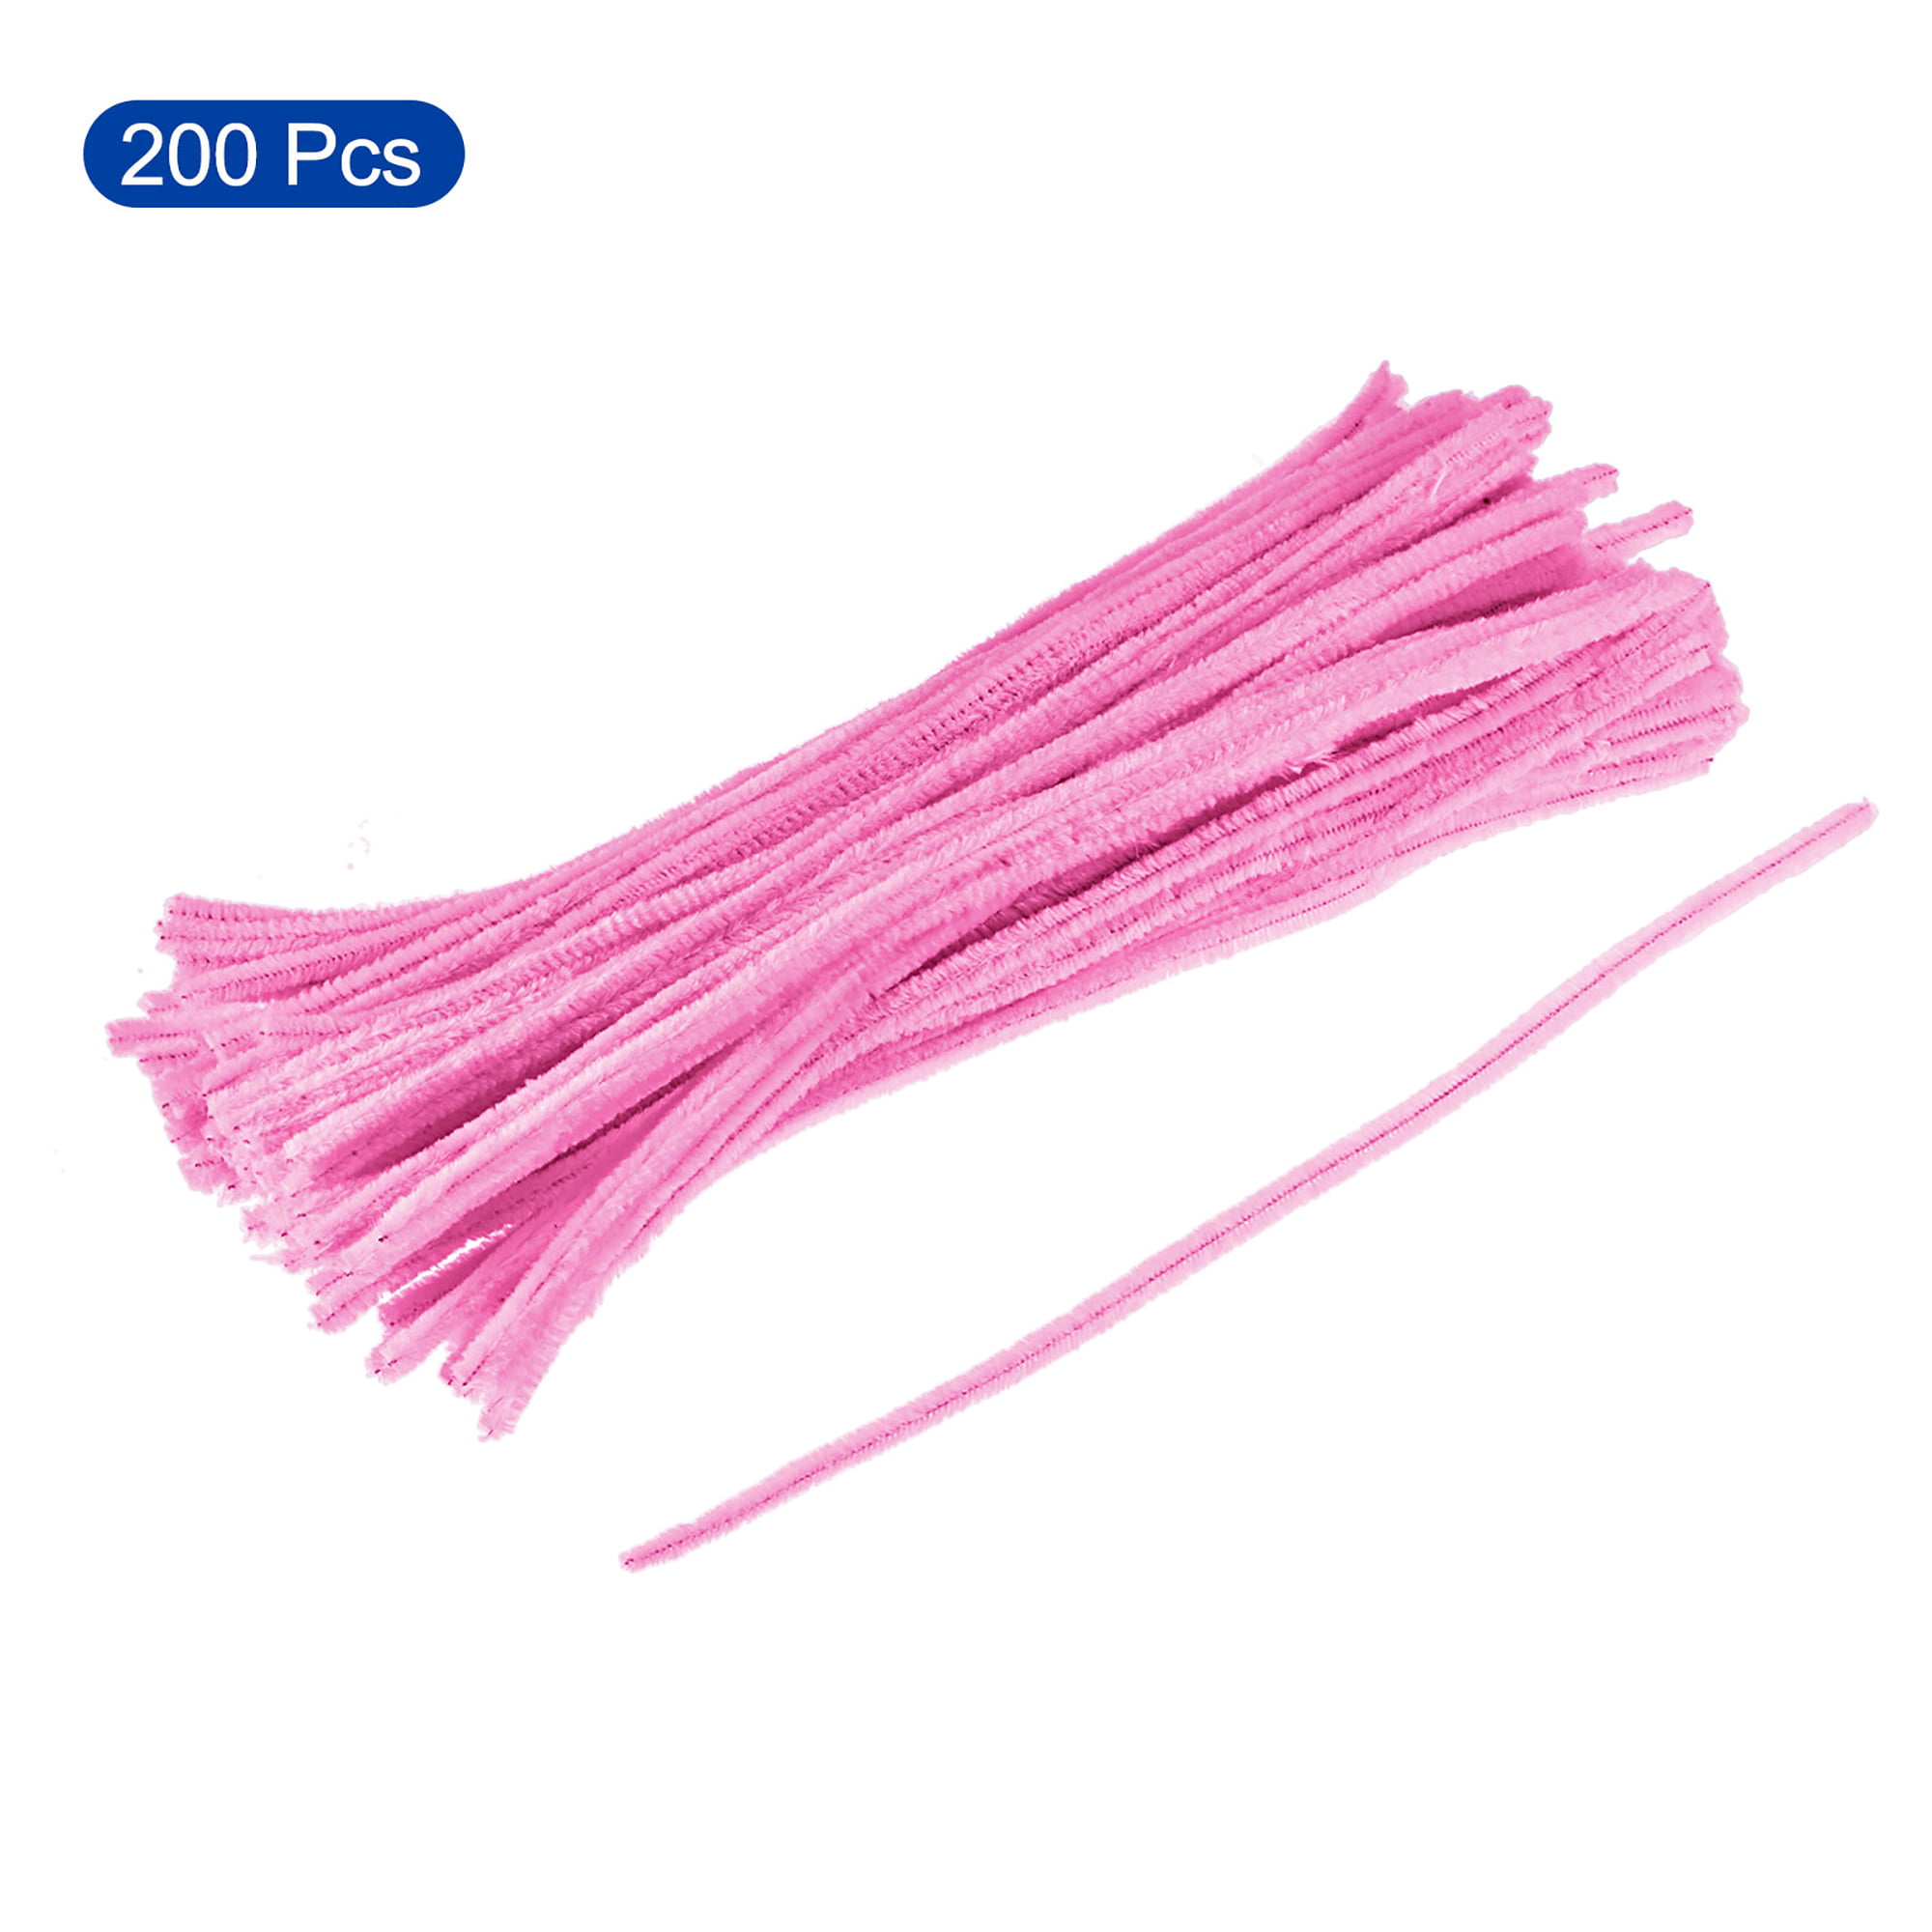 Pastel Pipe Cleaners, 30cm Long Chenille Stems, Assorted, Scrapbooking,  Card Making, Children's Craft Box Supply, 10/20/40 Pieces 